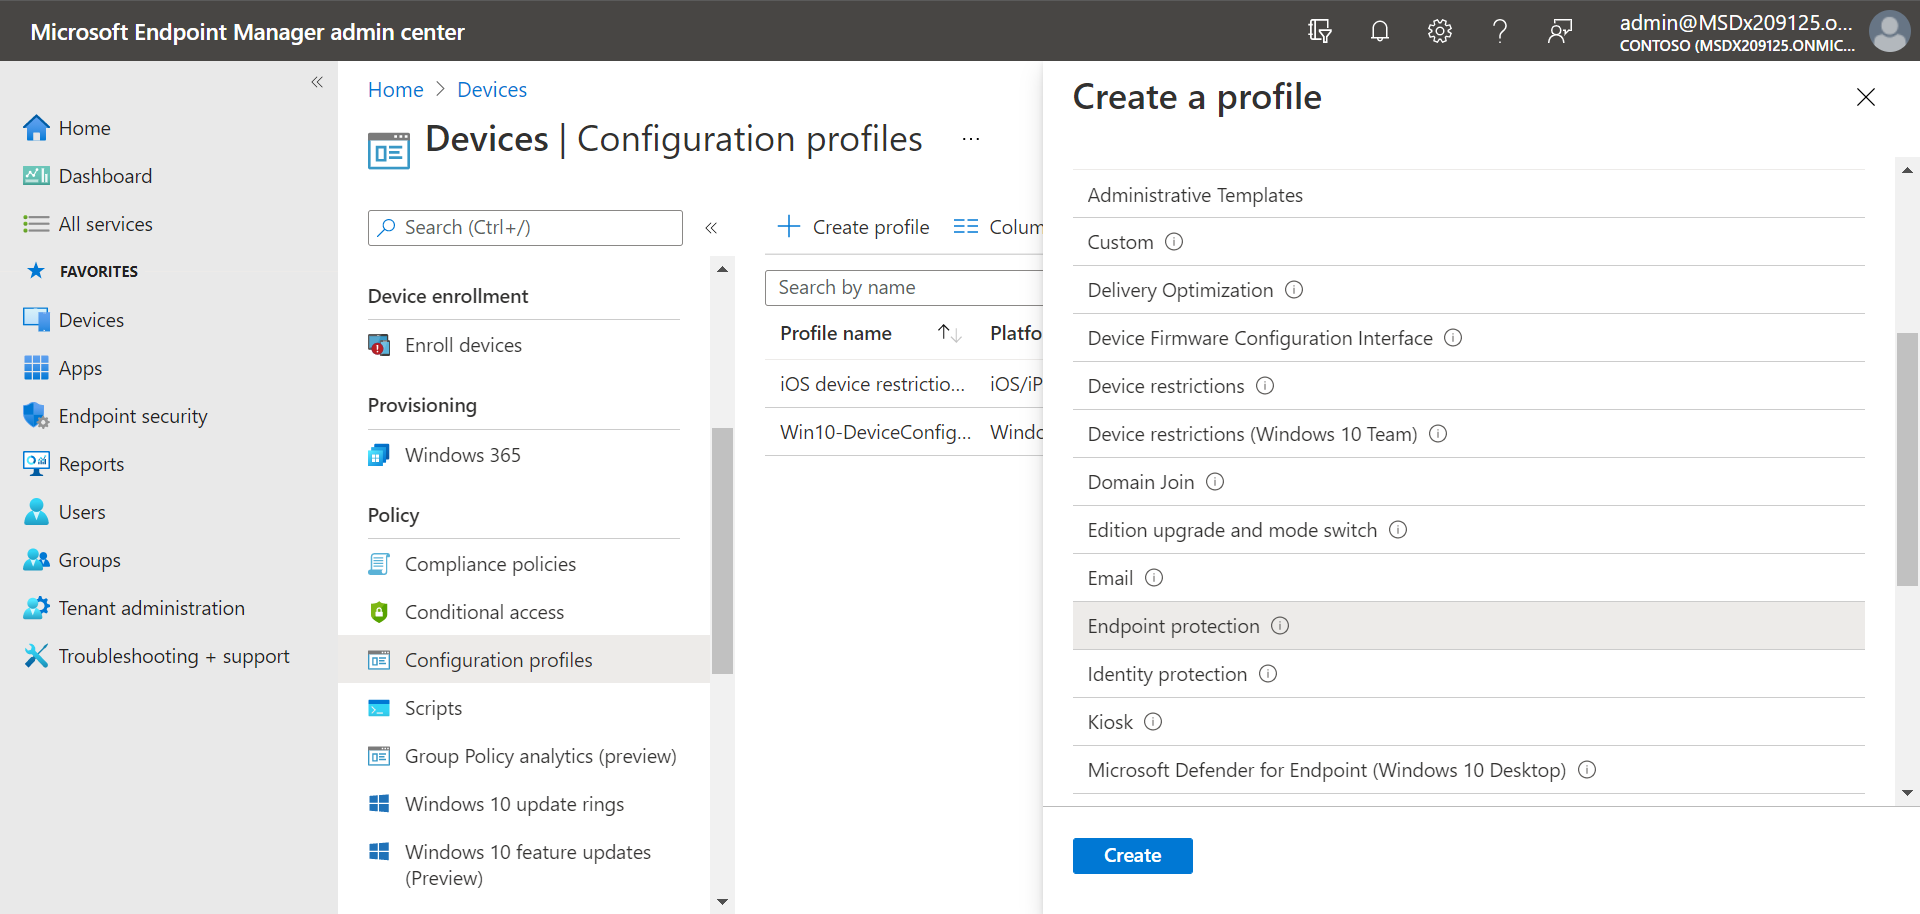 Endpoint protection profile in the Intune portal